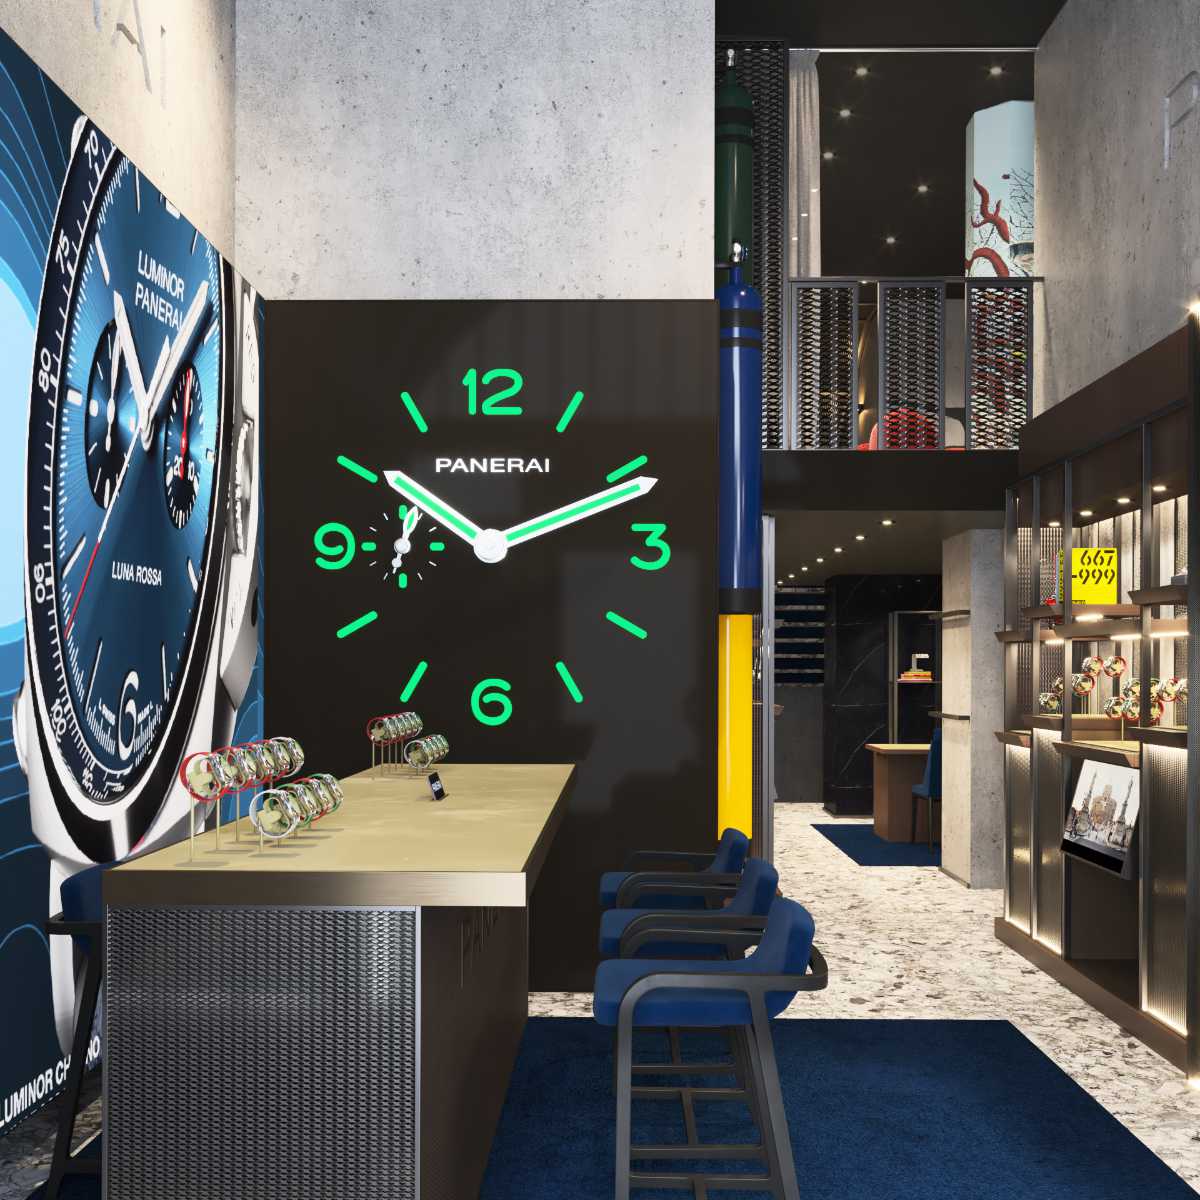 Panerai Unveiled A New Flagship Concept Store In Zurich